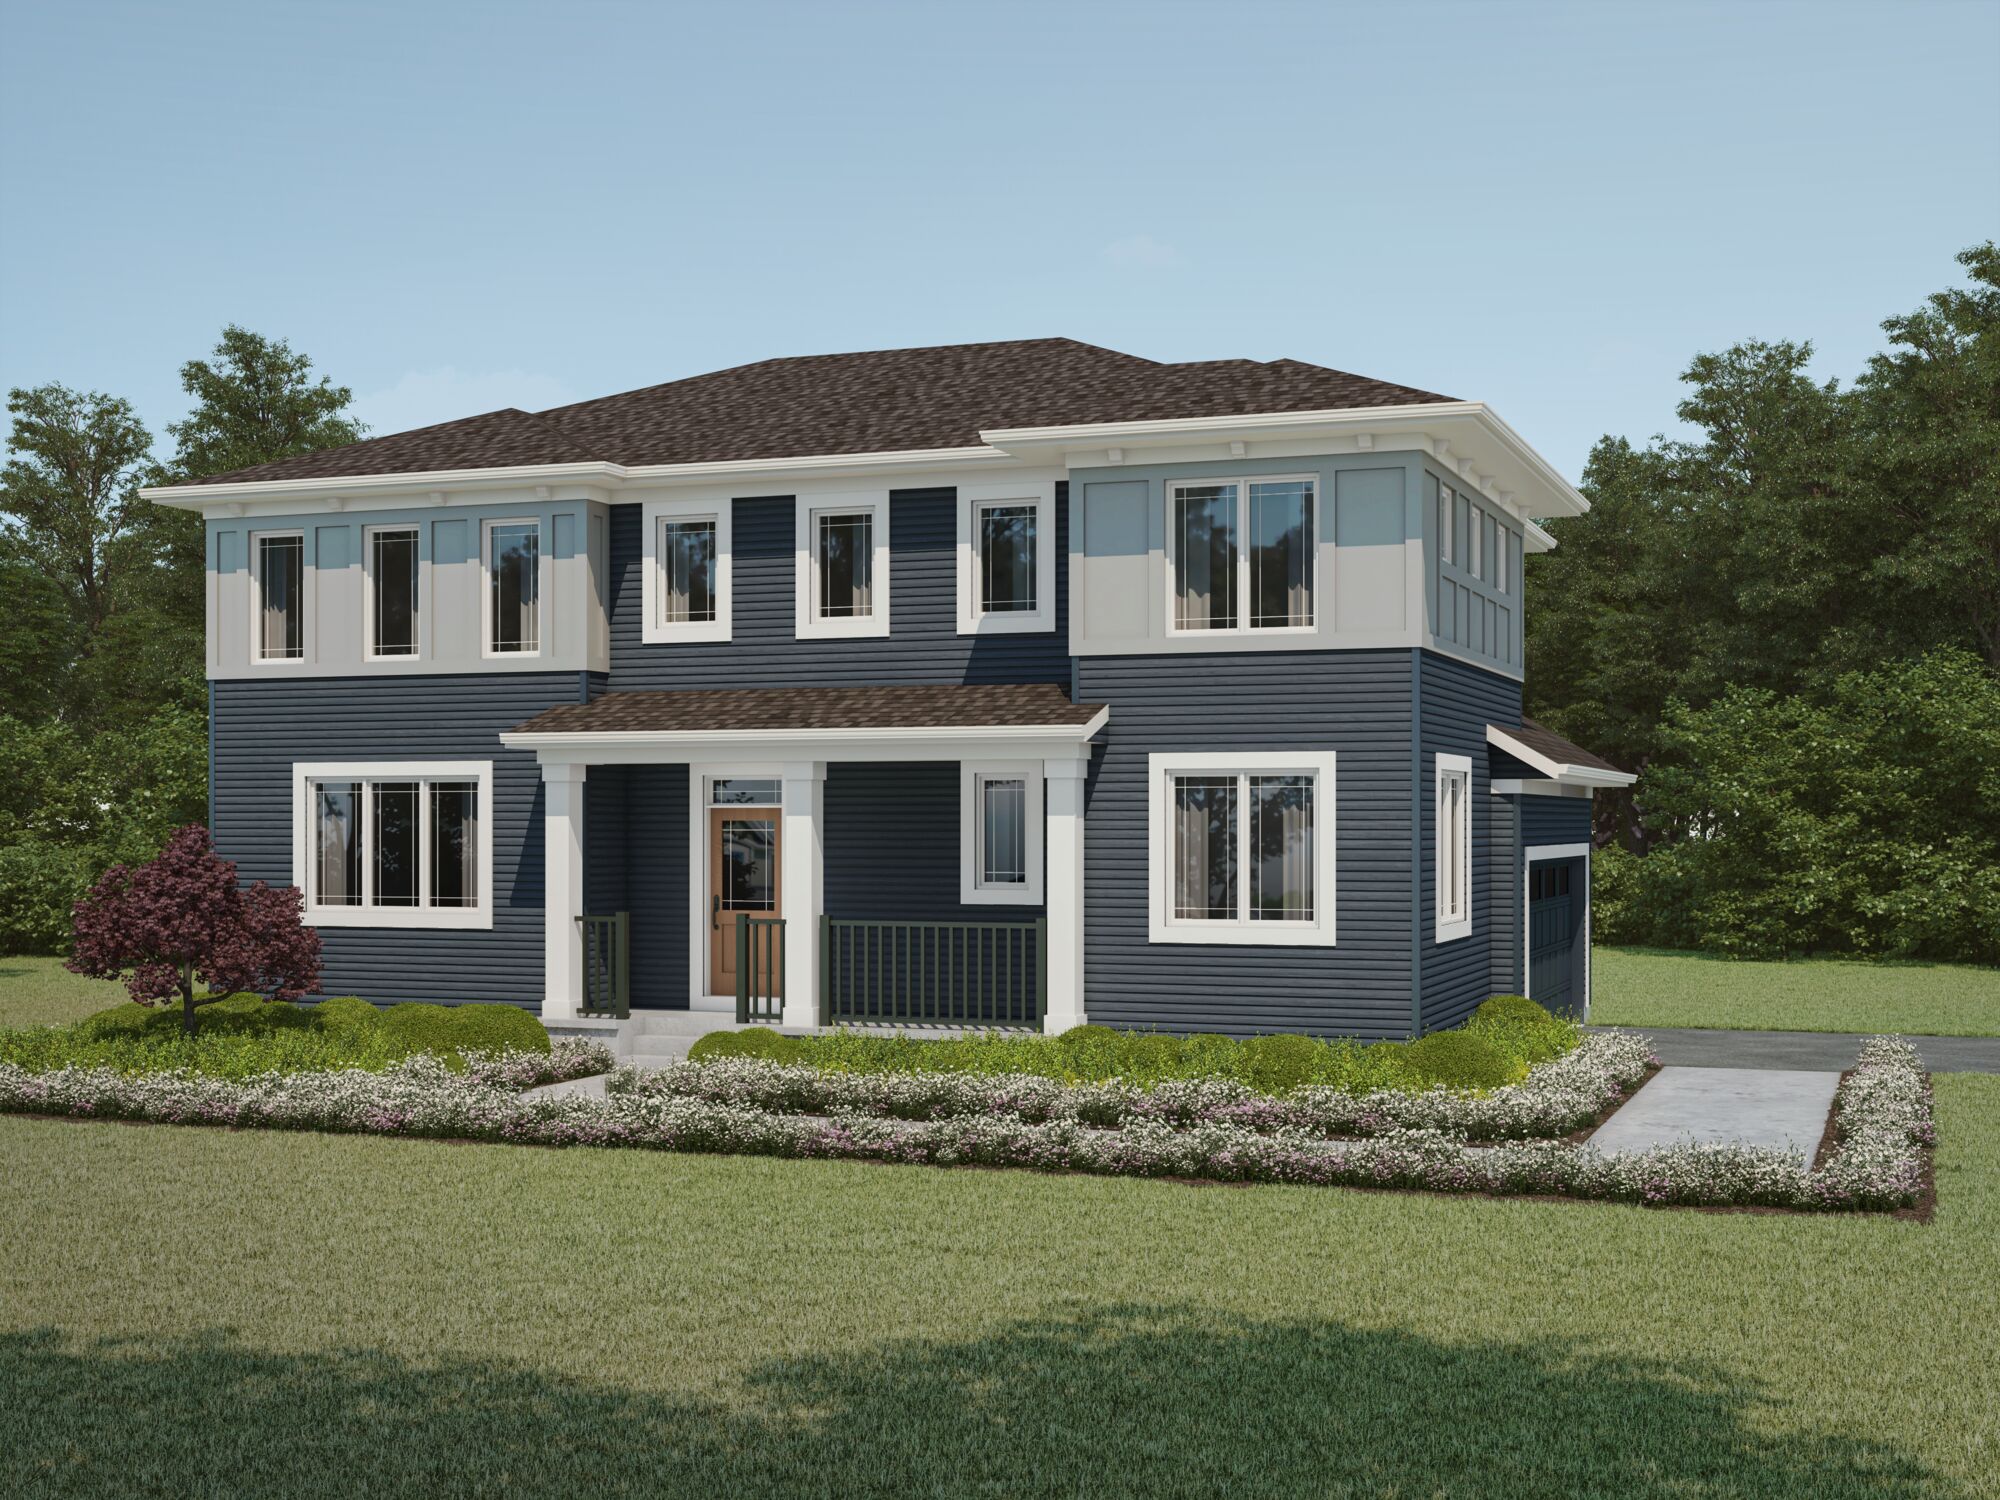 Rendering of the Prairie elevation for the Norquay Model